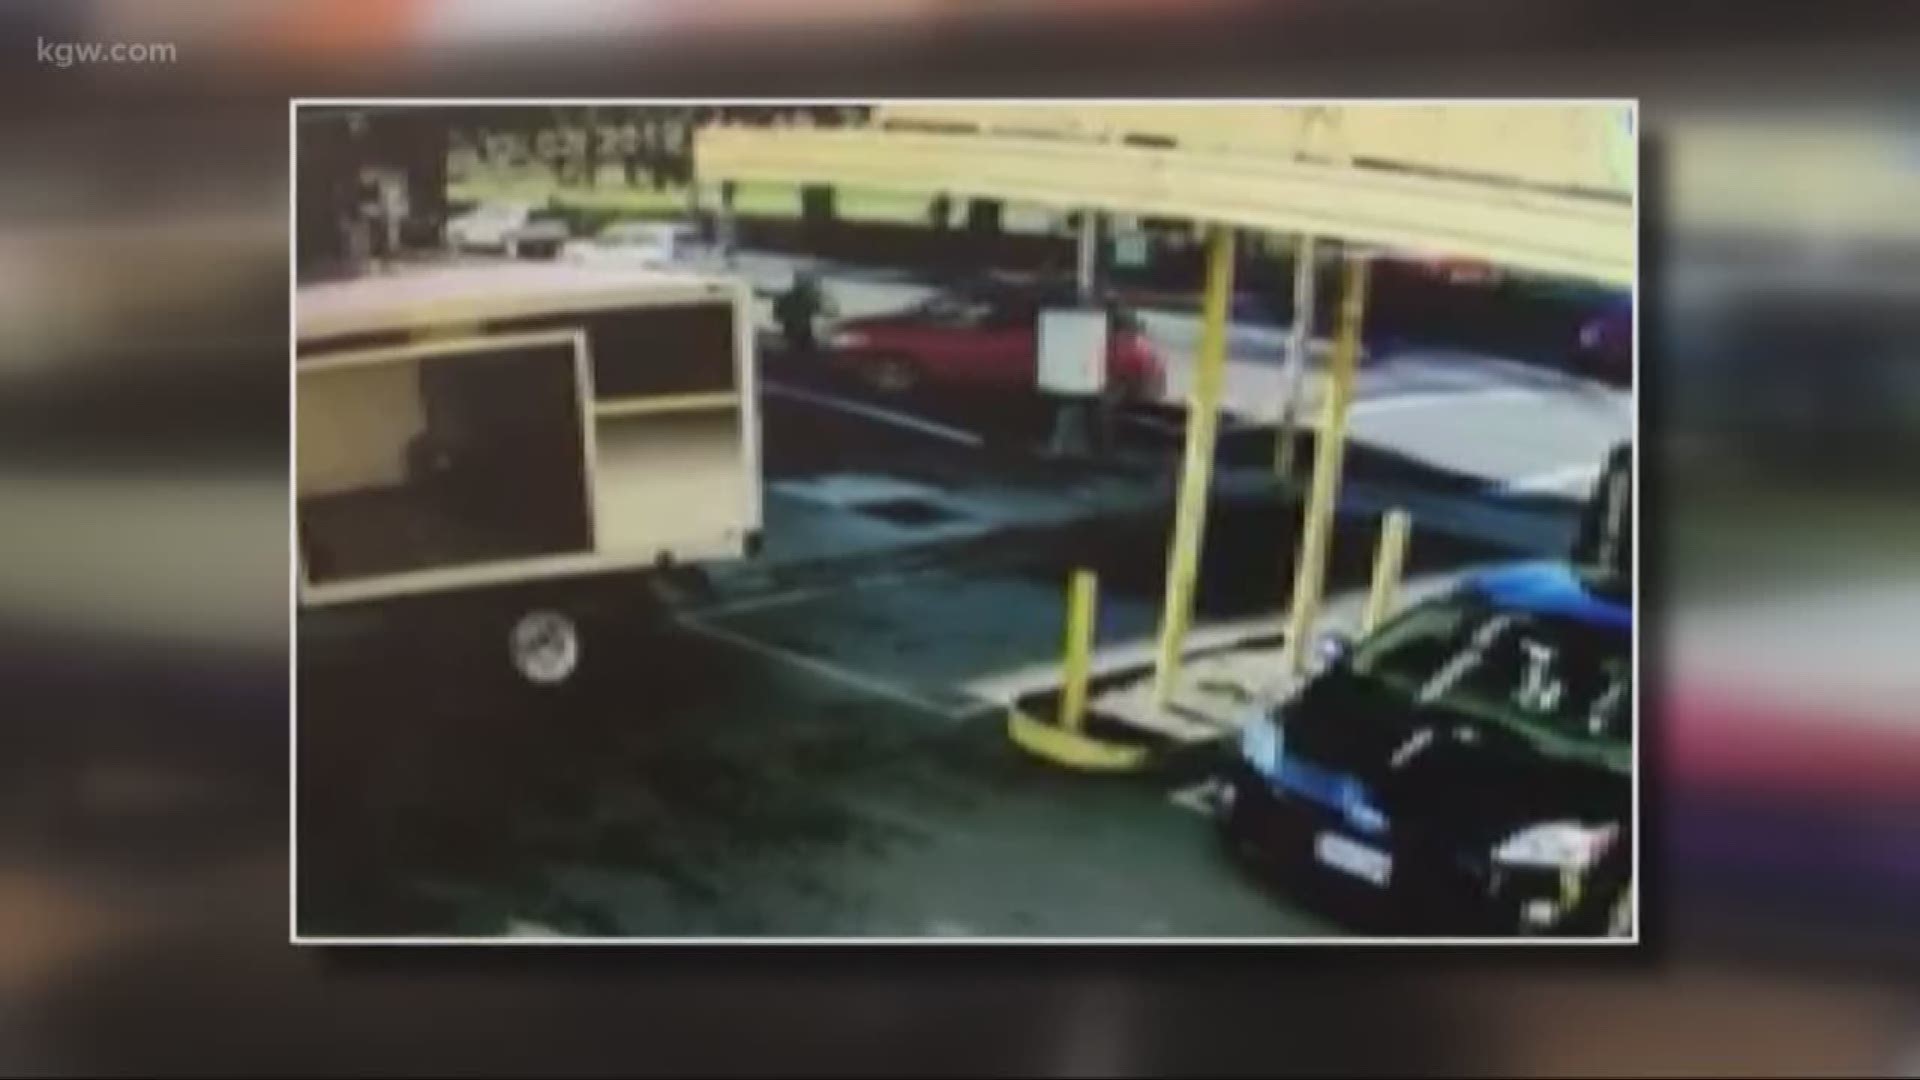 Surveillance video shows the car is a red Toyota Matrix.